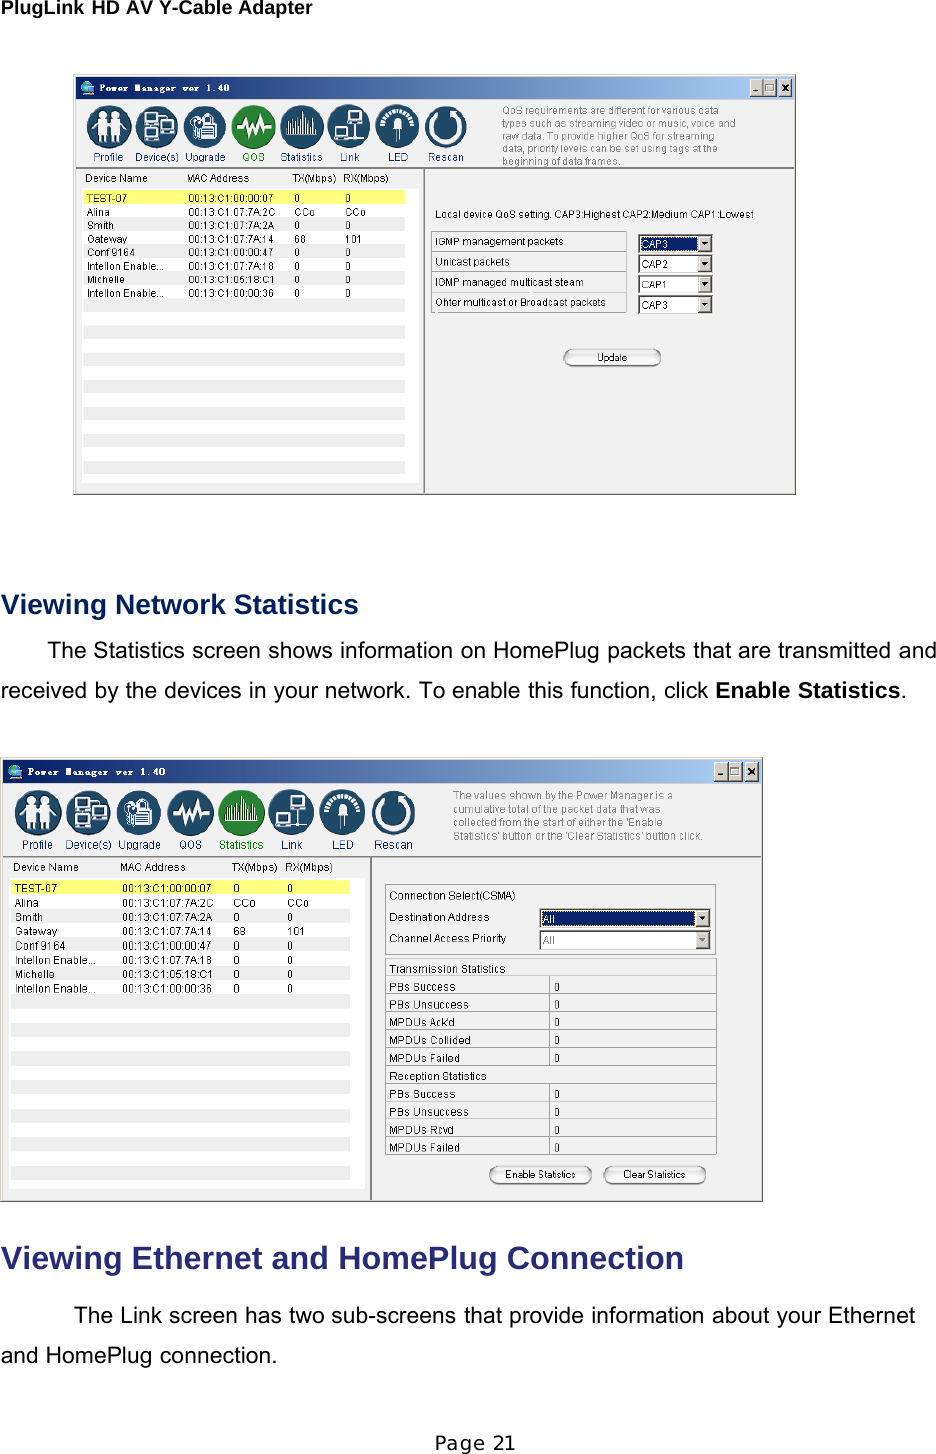 PlugLink HD AV Y-Cable Adapter Page 21           Viewing Network Statistics The Statistics screen shows information on HomePlug packets that are transmitted and received by the devices in your network. To enable this function, click Enable Statistics.       Viewing Ethernet and HomePlug Connection  The Link screen has two sub-screens that provide information about your Ethernet and HomePlug connection. 